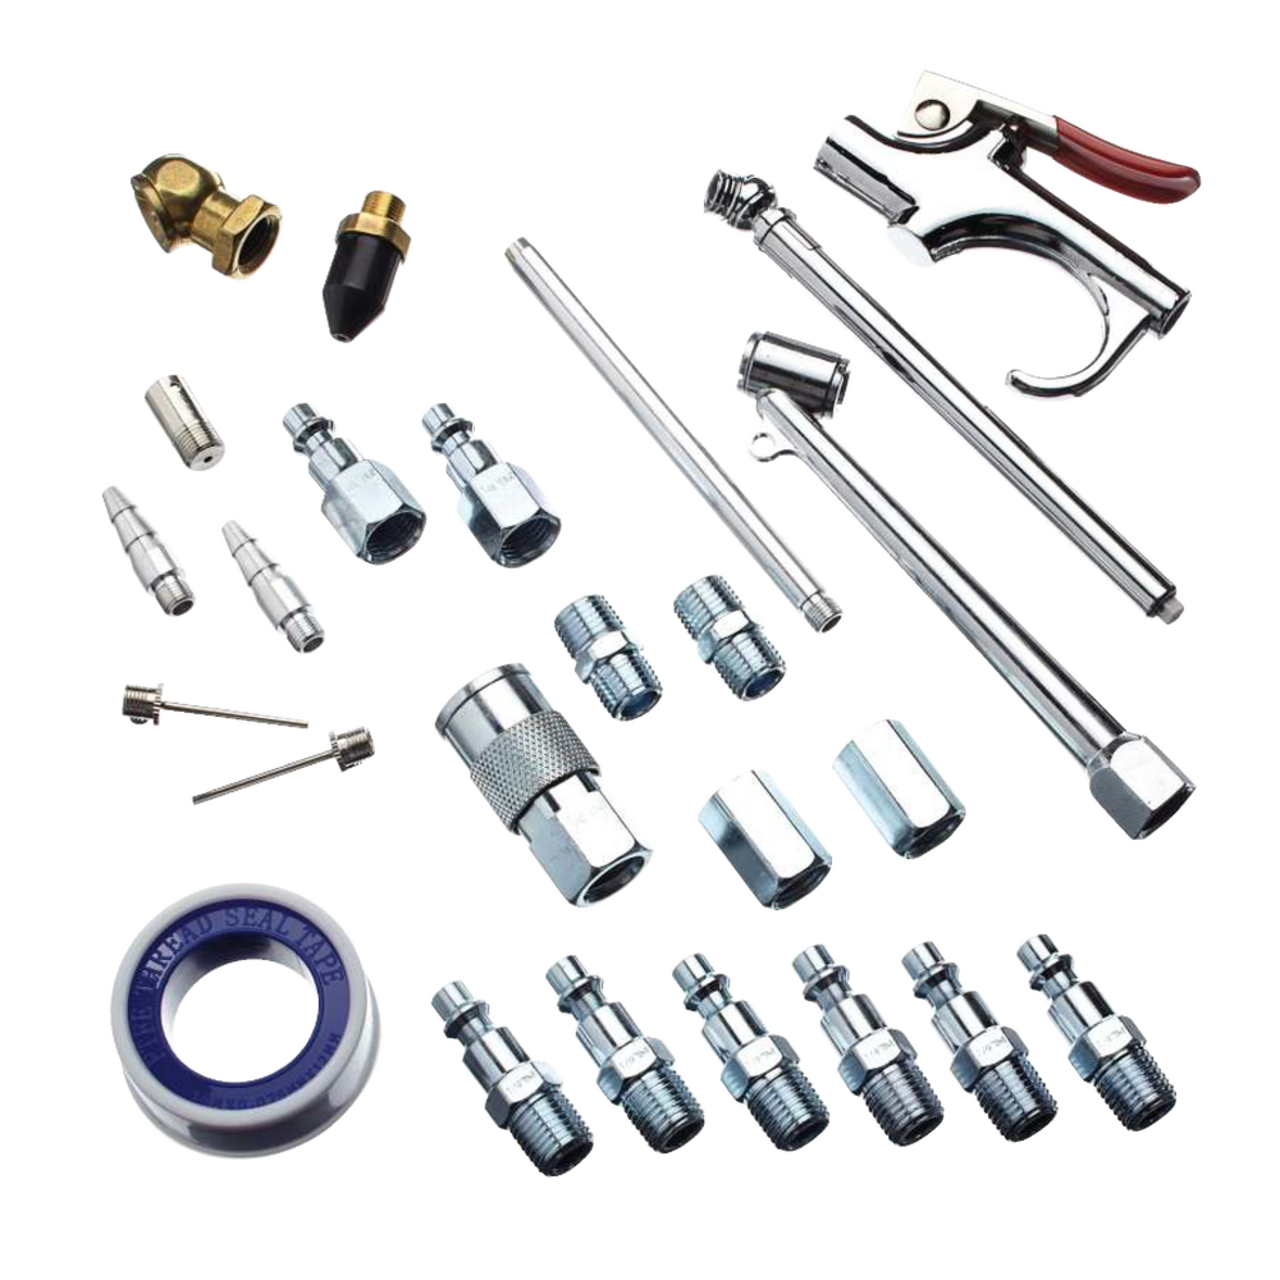 Mastercraft Quick-Connect Air Tool Coupler & Plugs Kit, 1/4-in NPT, 4-pc